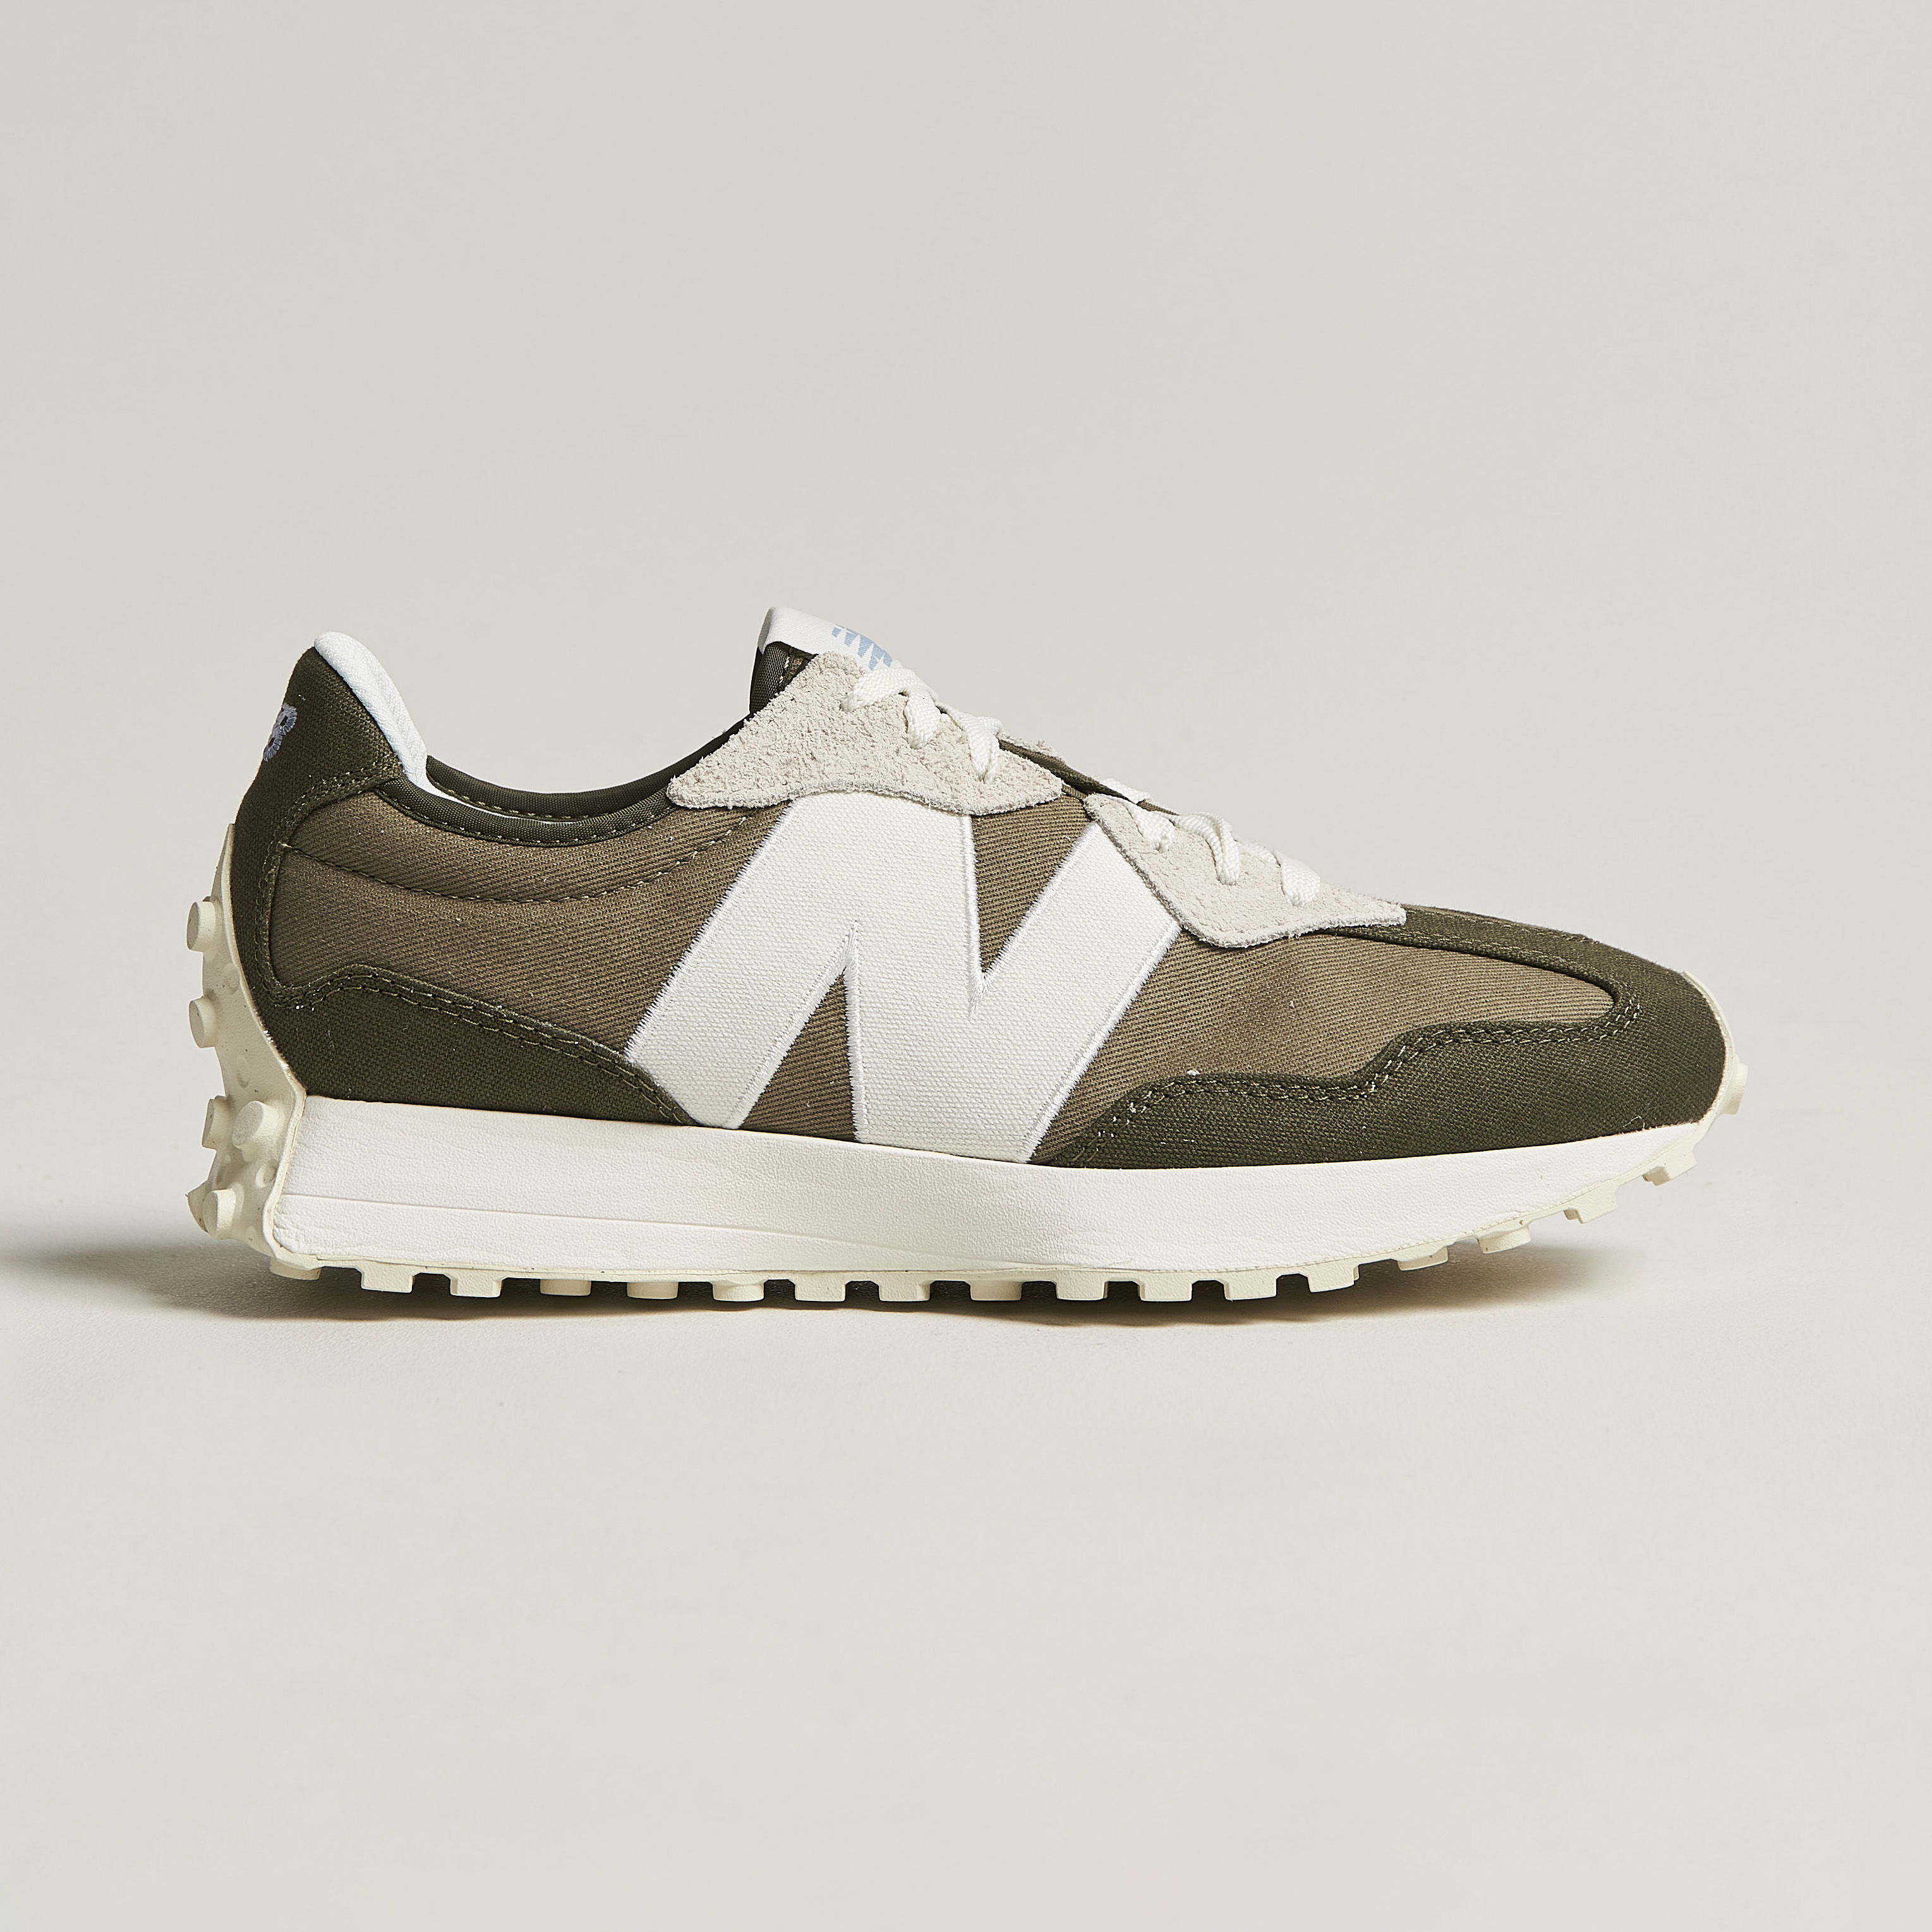 New Balance 327 Sneakers Military Olive at CareOfCarl.com